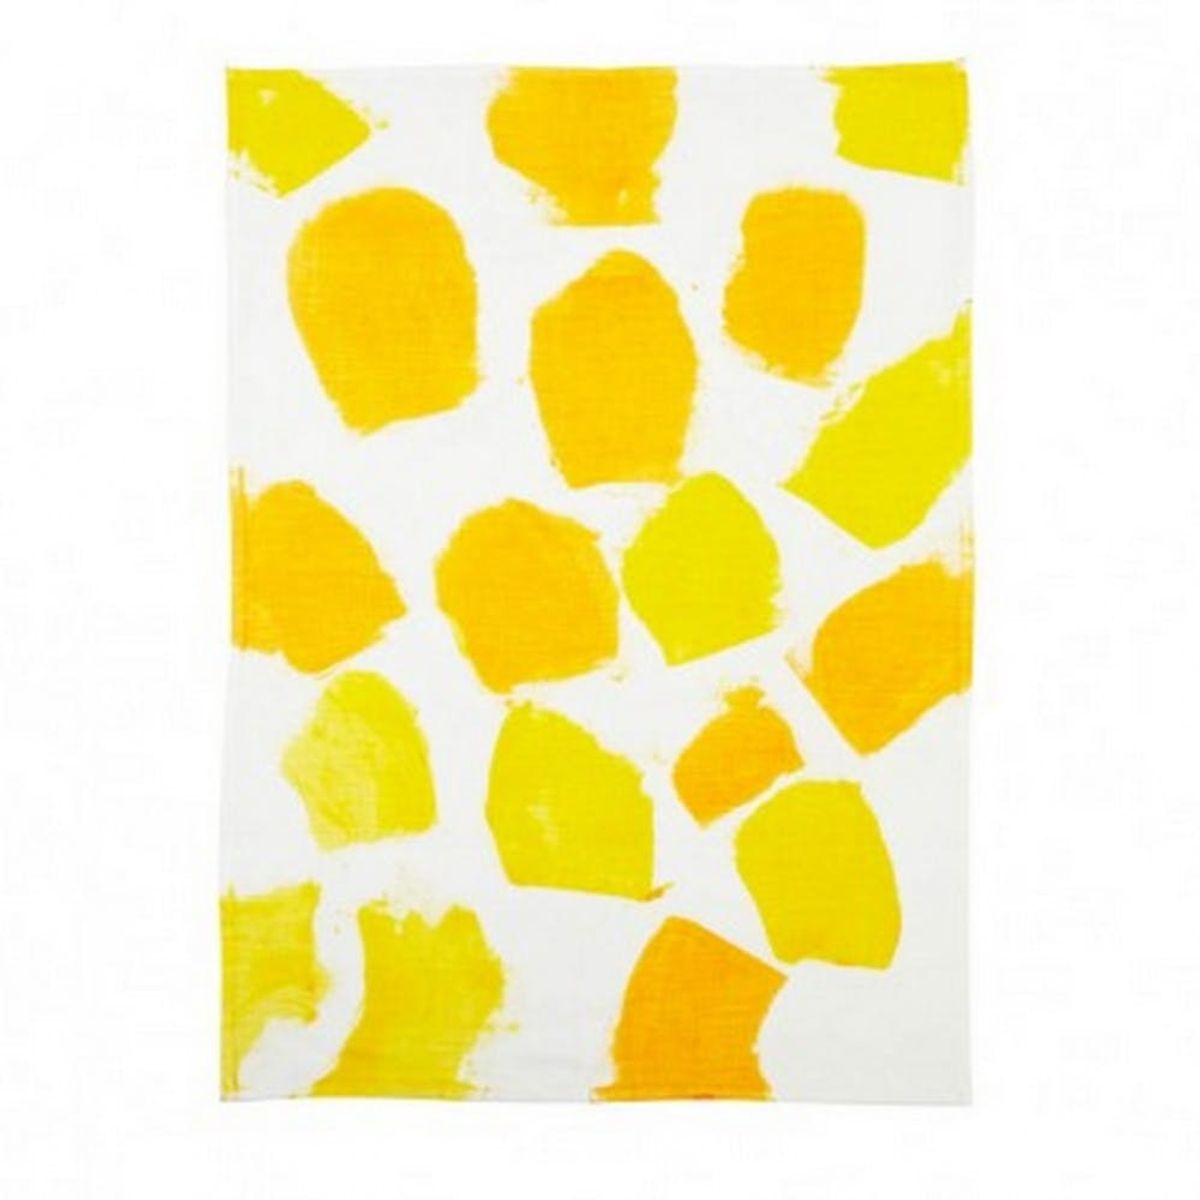 25 Tea Towels to Accessorize Your Kitchen